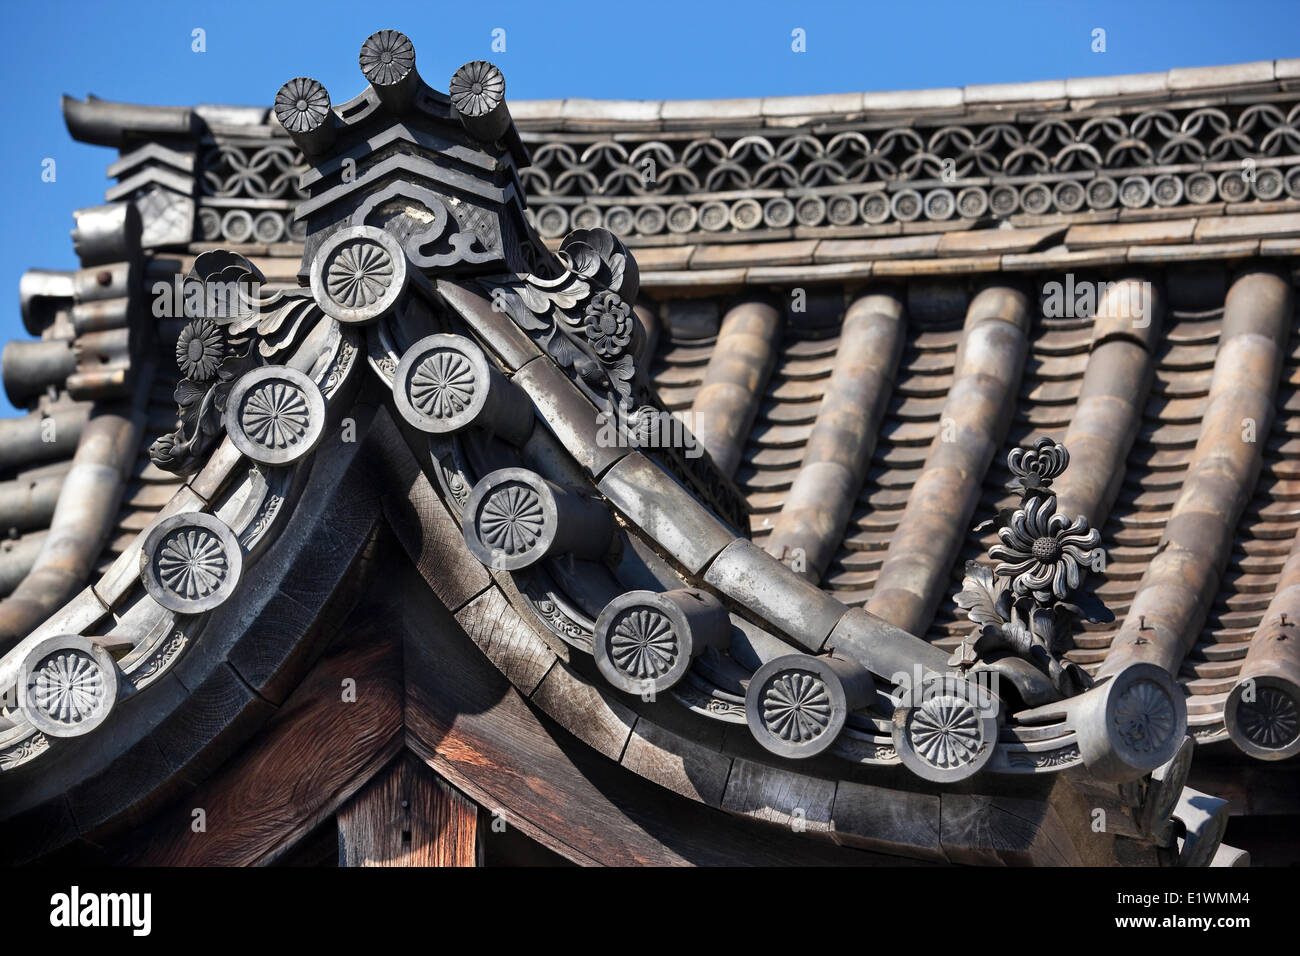 Architectural detail a curved roof eave Sanjusangendo Temple in Kyoto Japan. The roof is made ceramic tiles the design on the Stock Photo